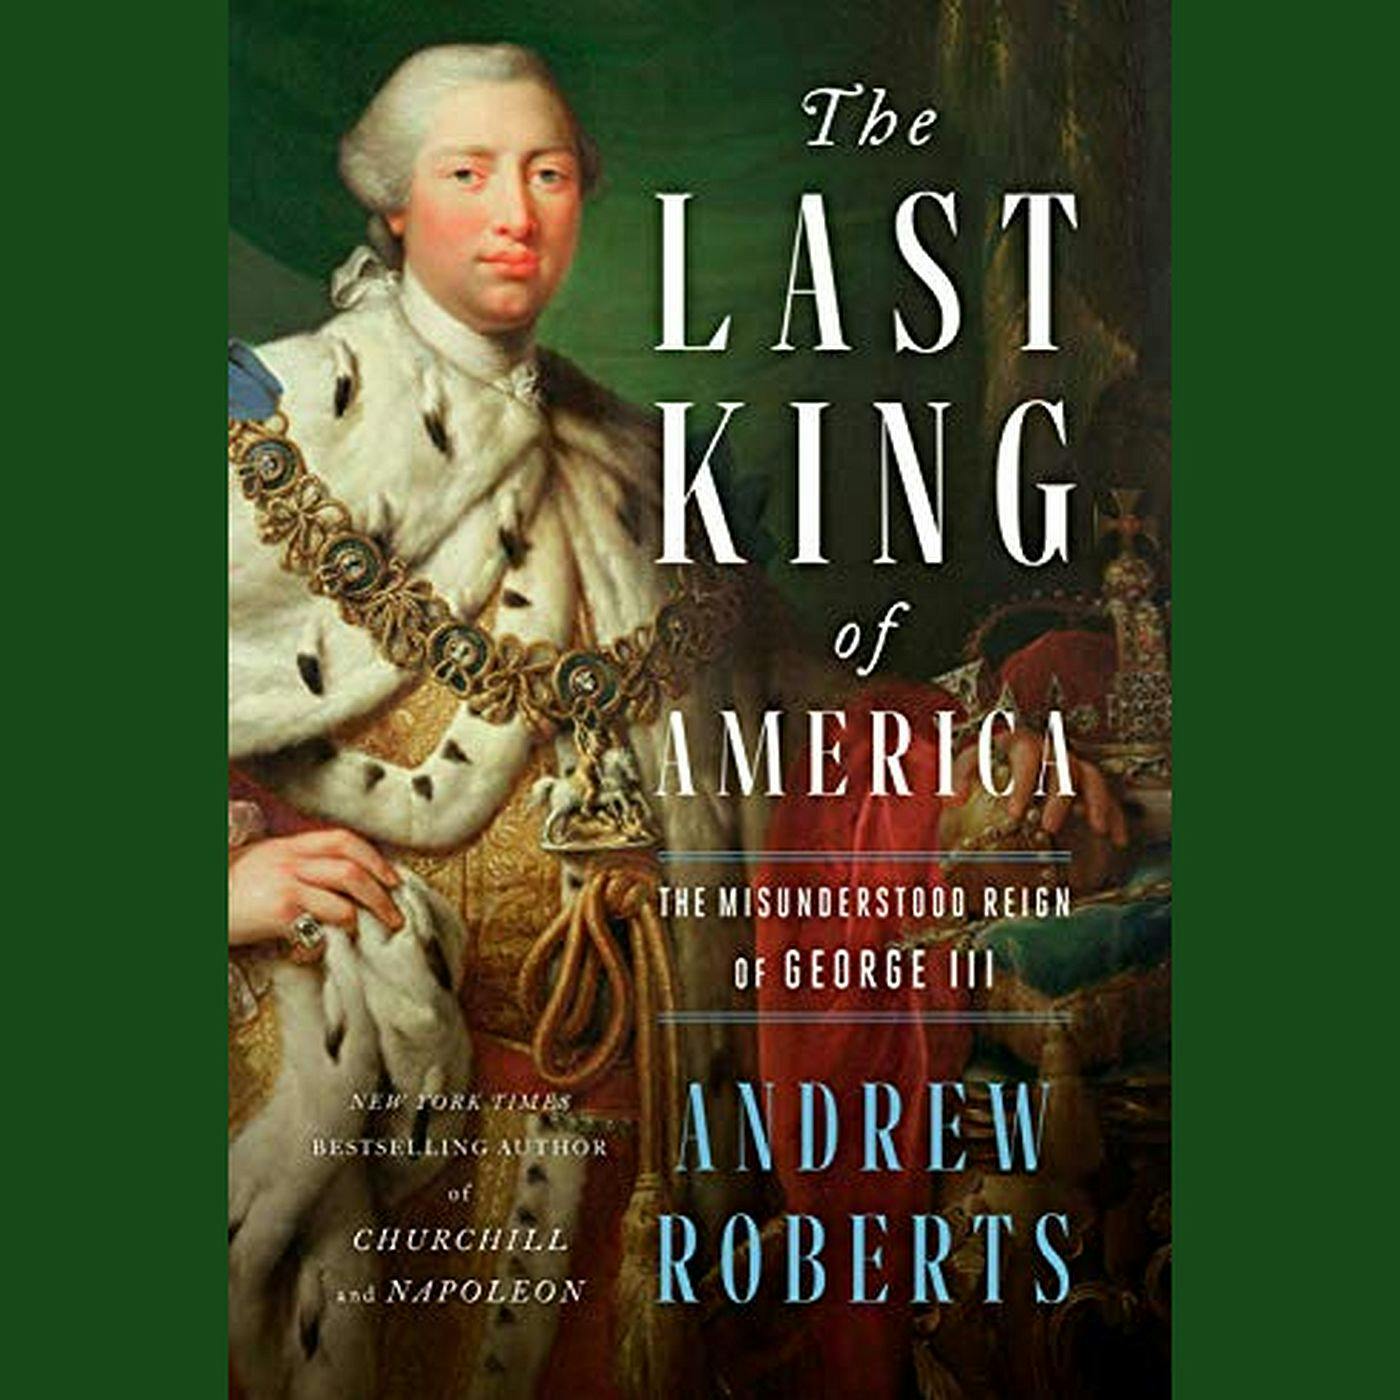 AR-SP15 Andrew Roberts - The Last King of America